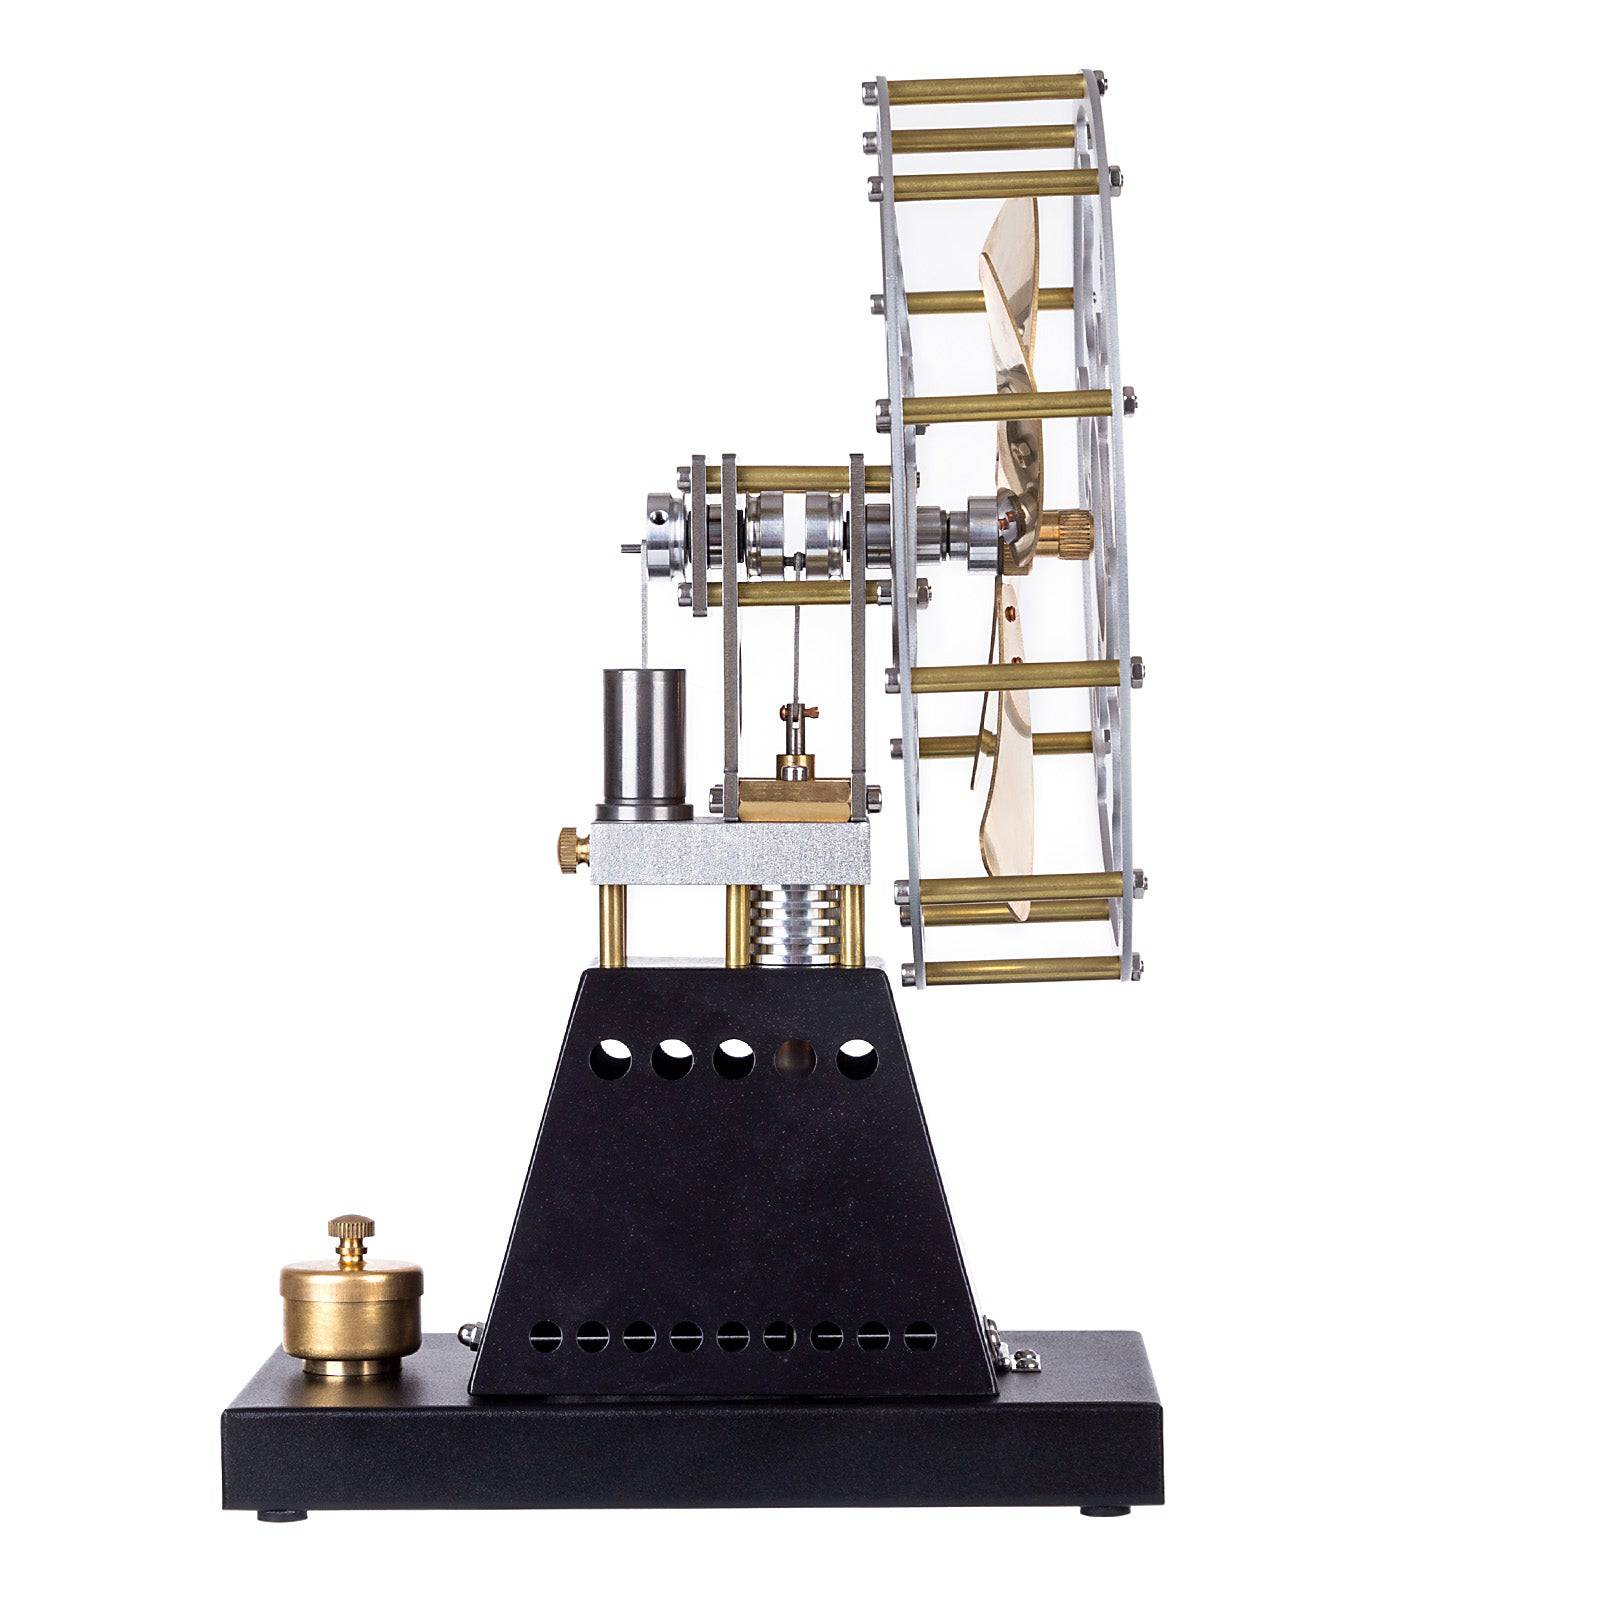 Stirling Engine Fans for Wood Stoves and Off-Grid.